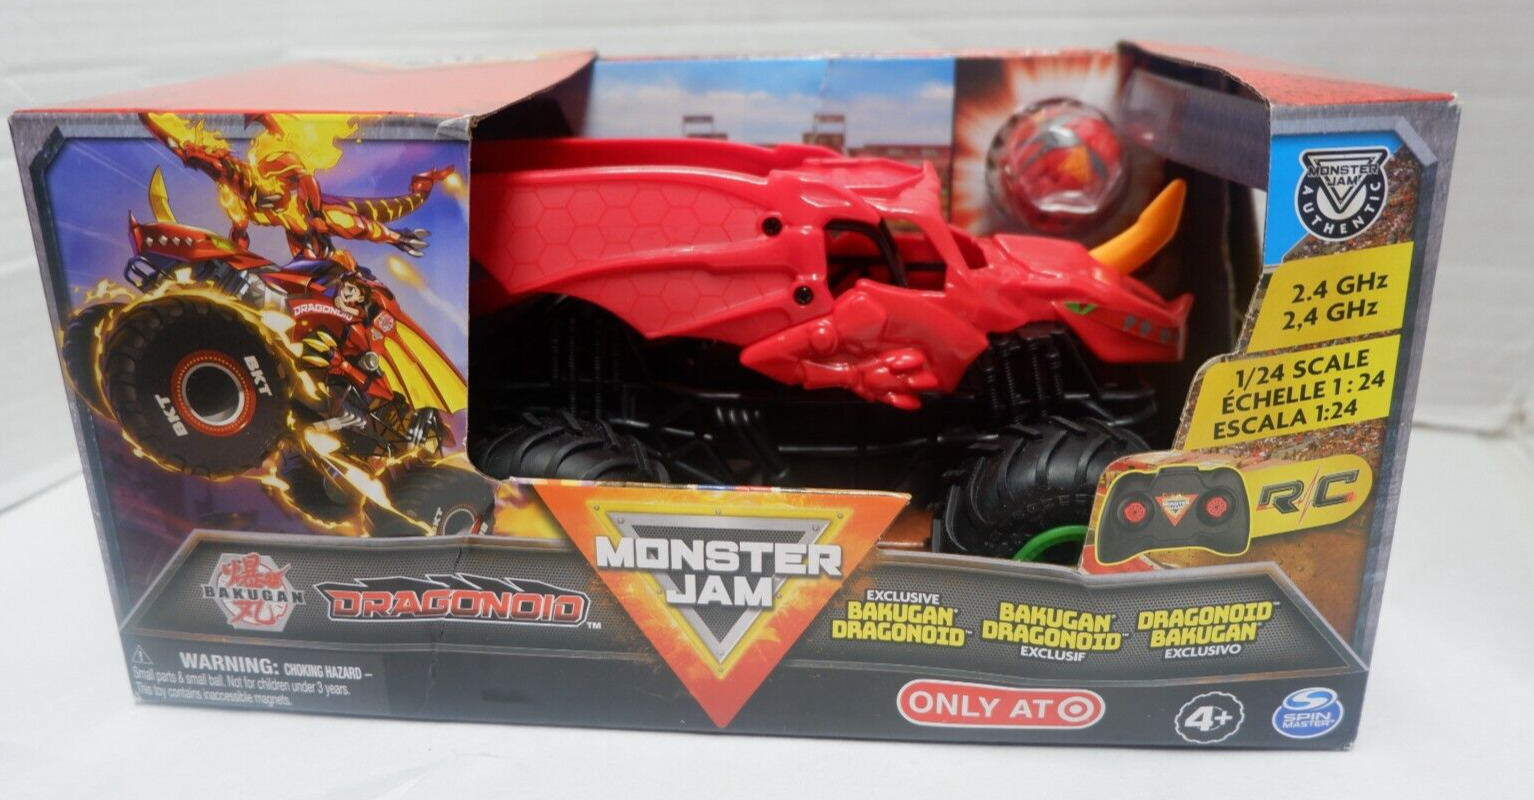 Monster Jam Official Red Bakugan Dragonoid 1/24 Scale RC Truck Exclusive - New